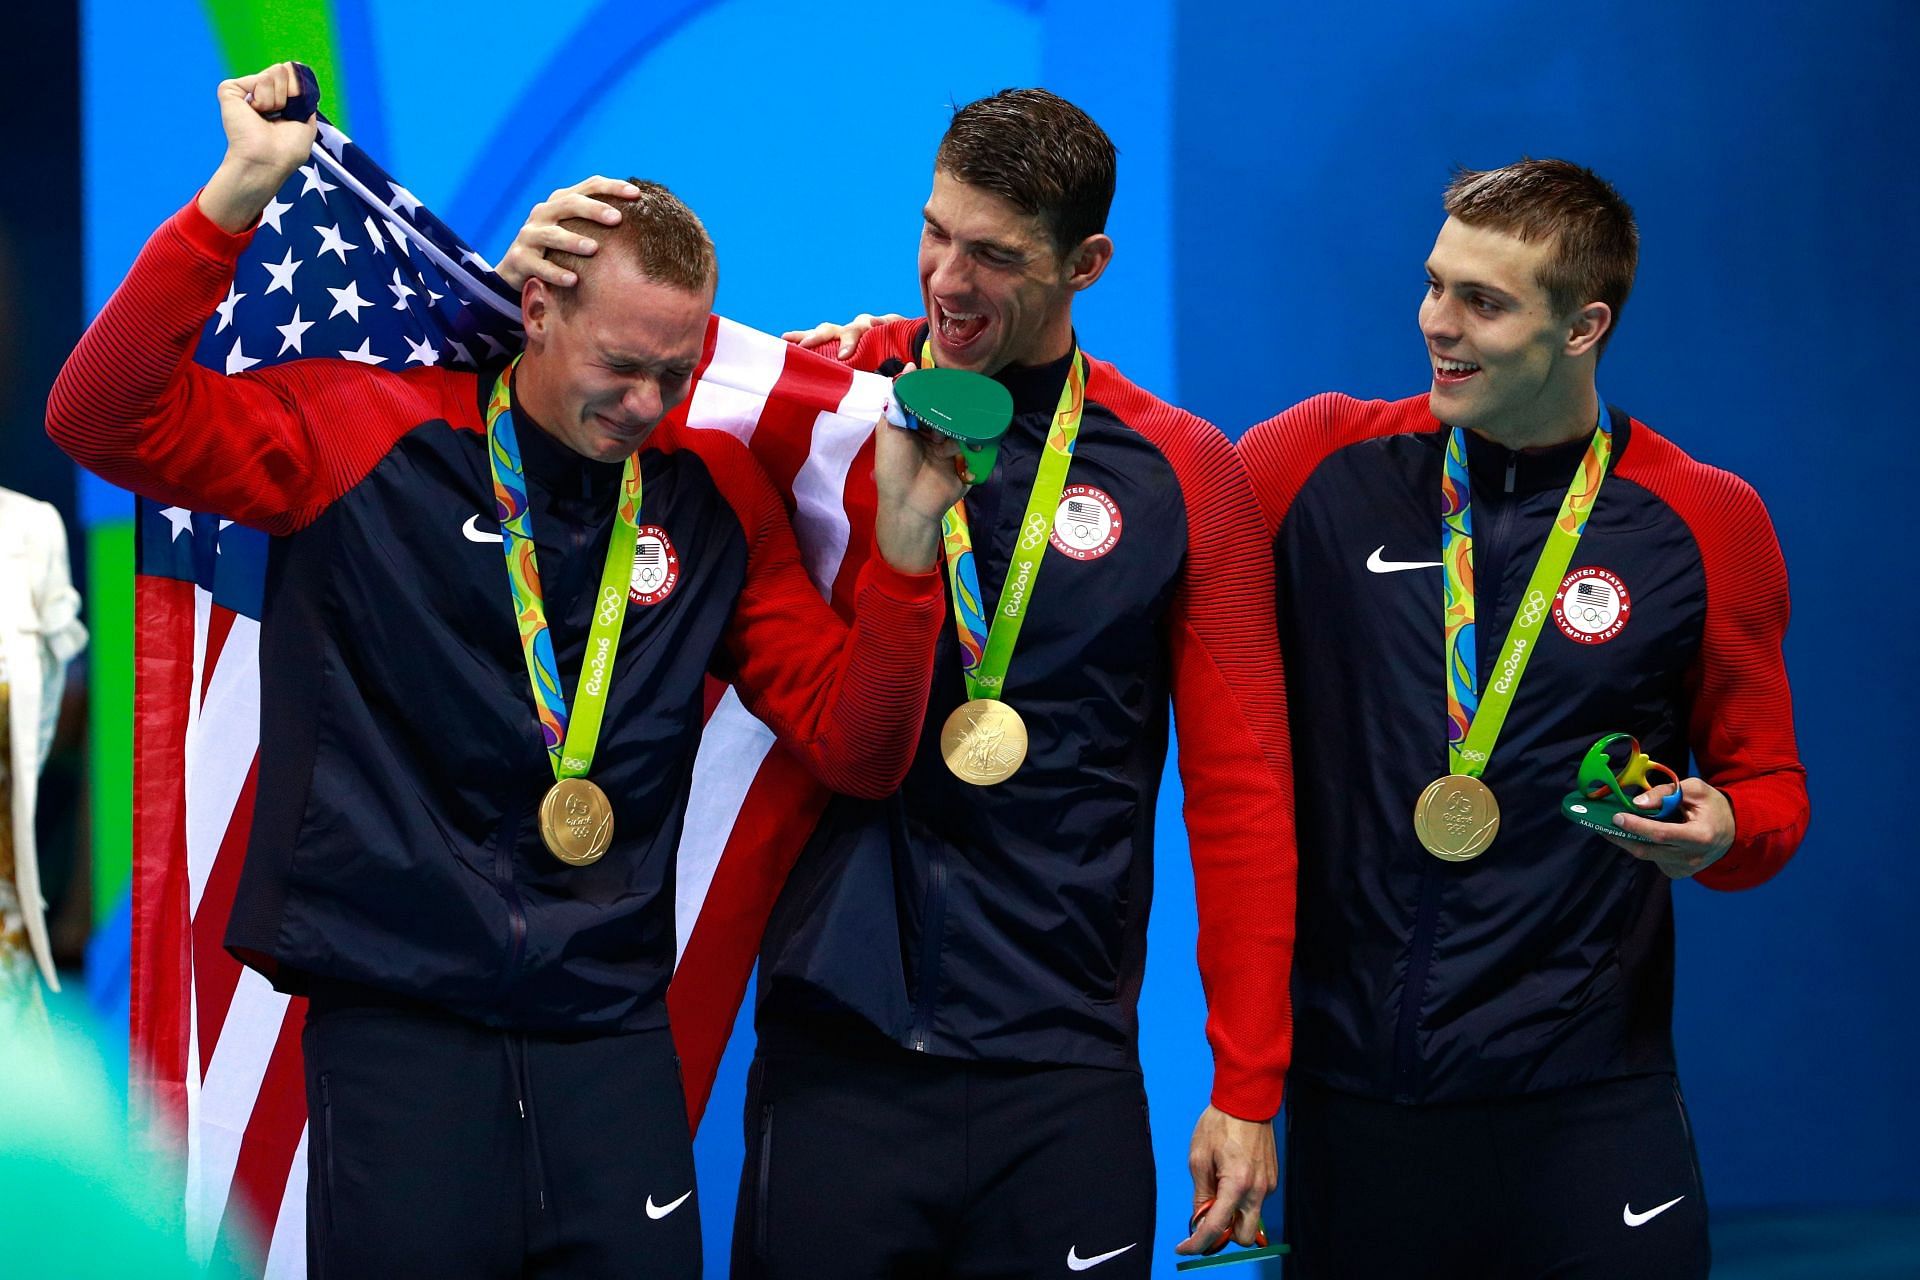 Phelps and Dressel at the 2016 Rio Olympics